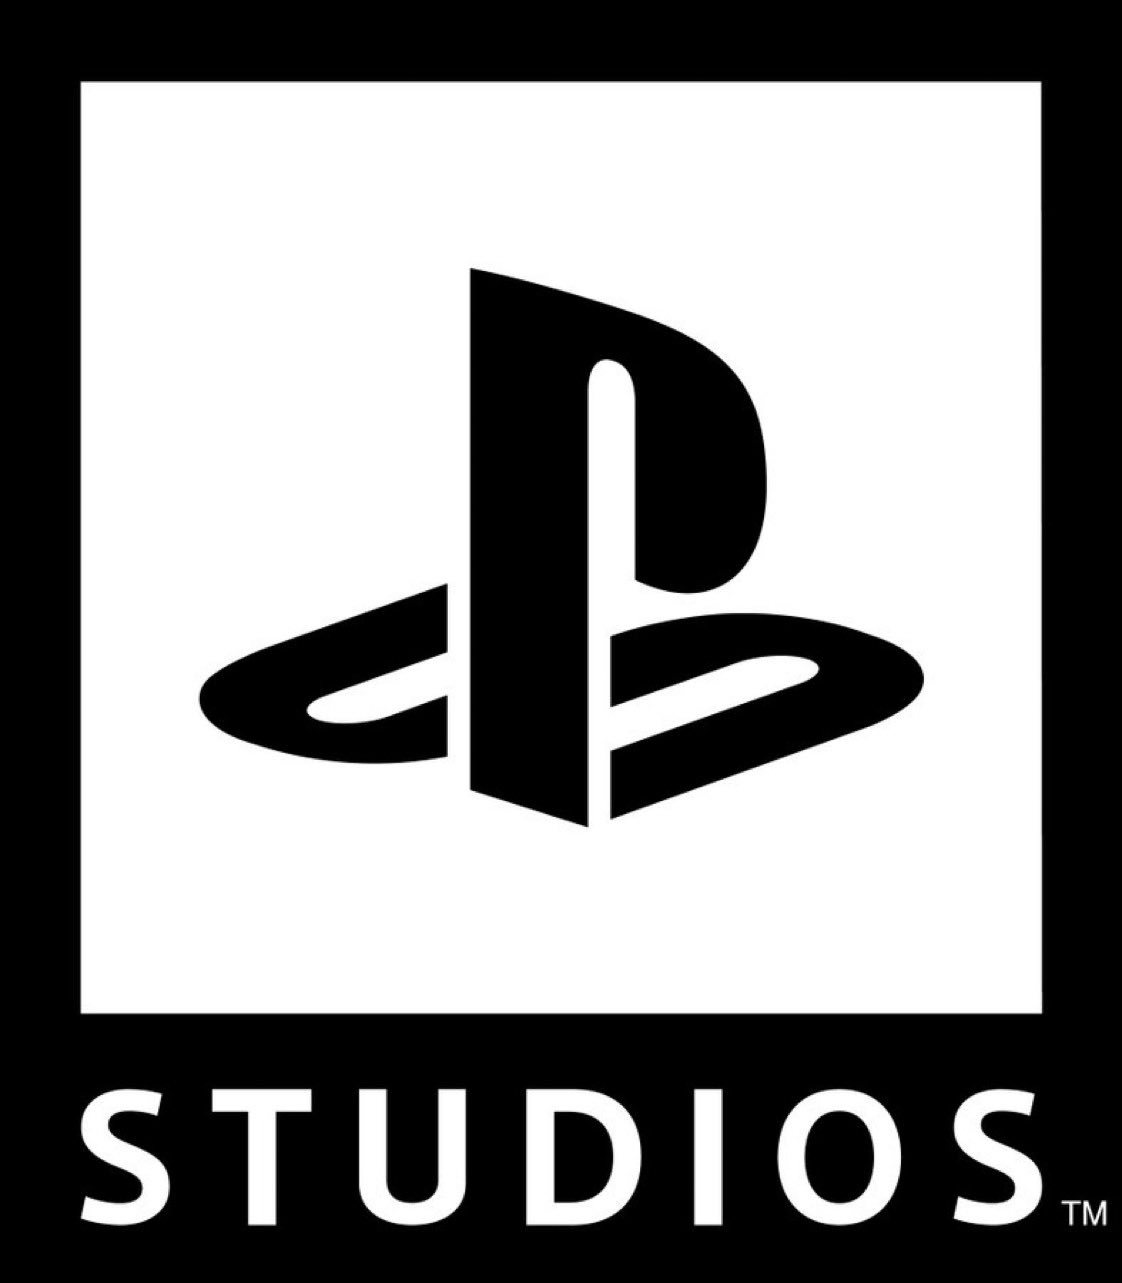 Play ▷ on Twitter: "• More than 25 PlayStation Studios PS5 games in  development, about half are new IPs • PSVR2 likely launching 2022 • Horizon  Forbidden West likely out this year •